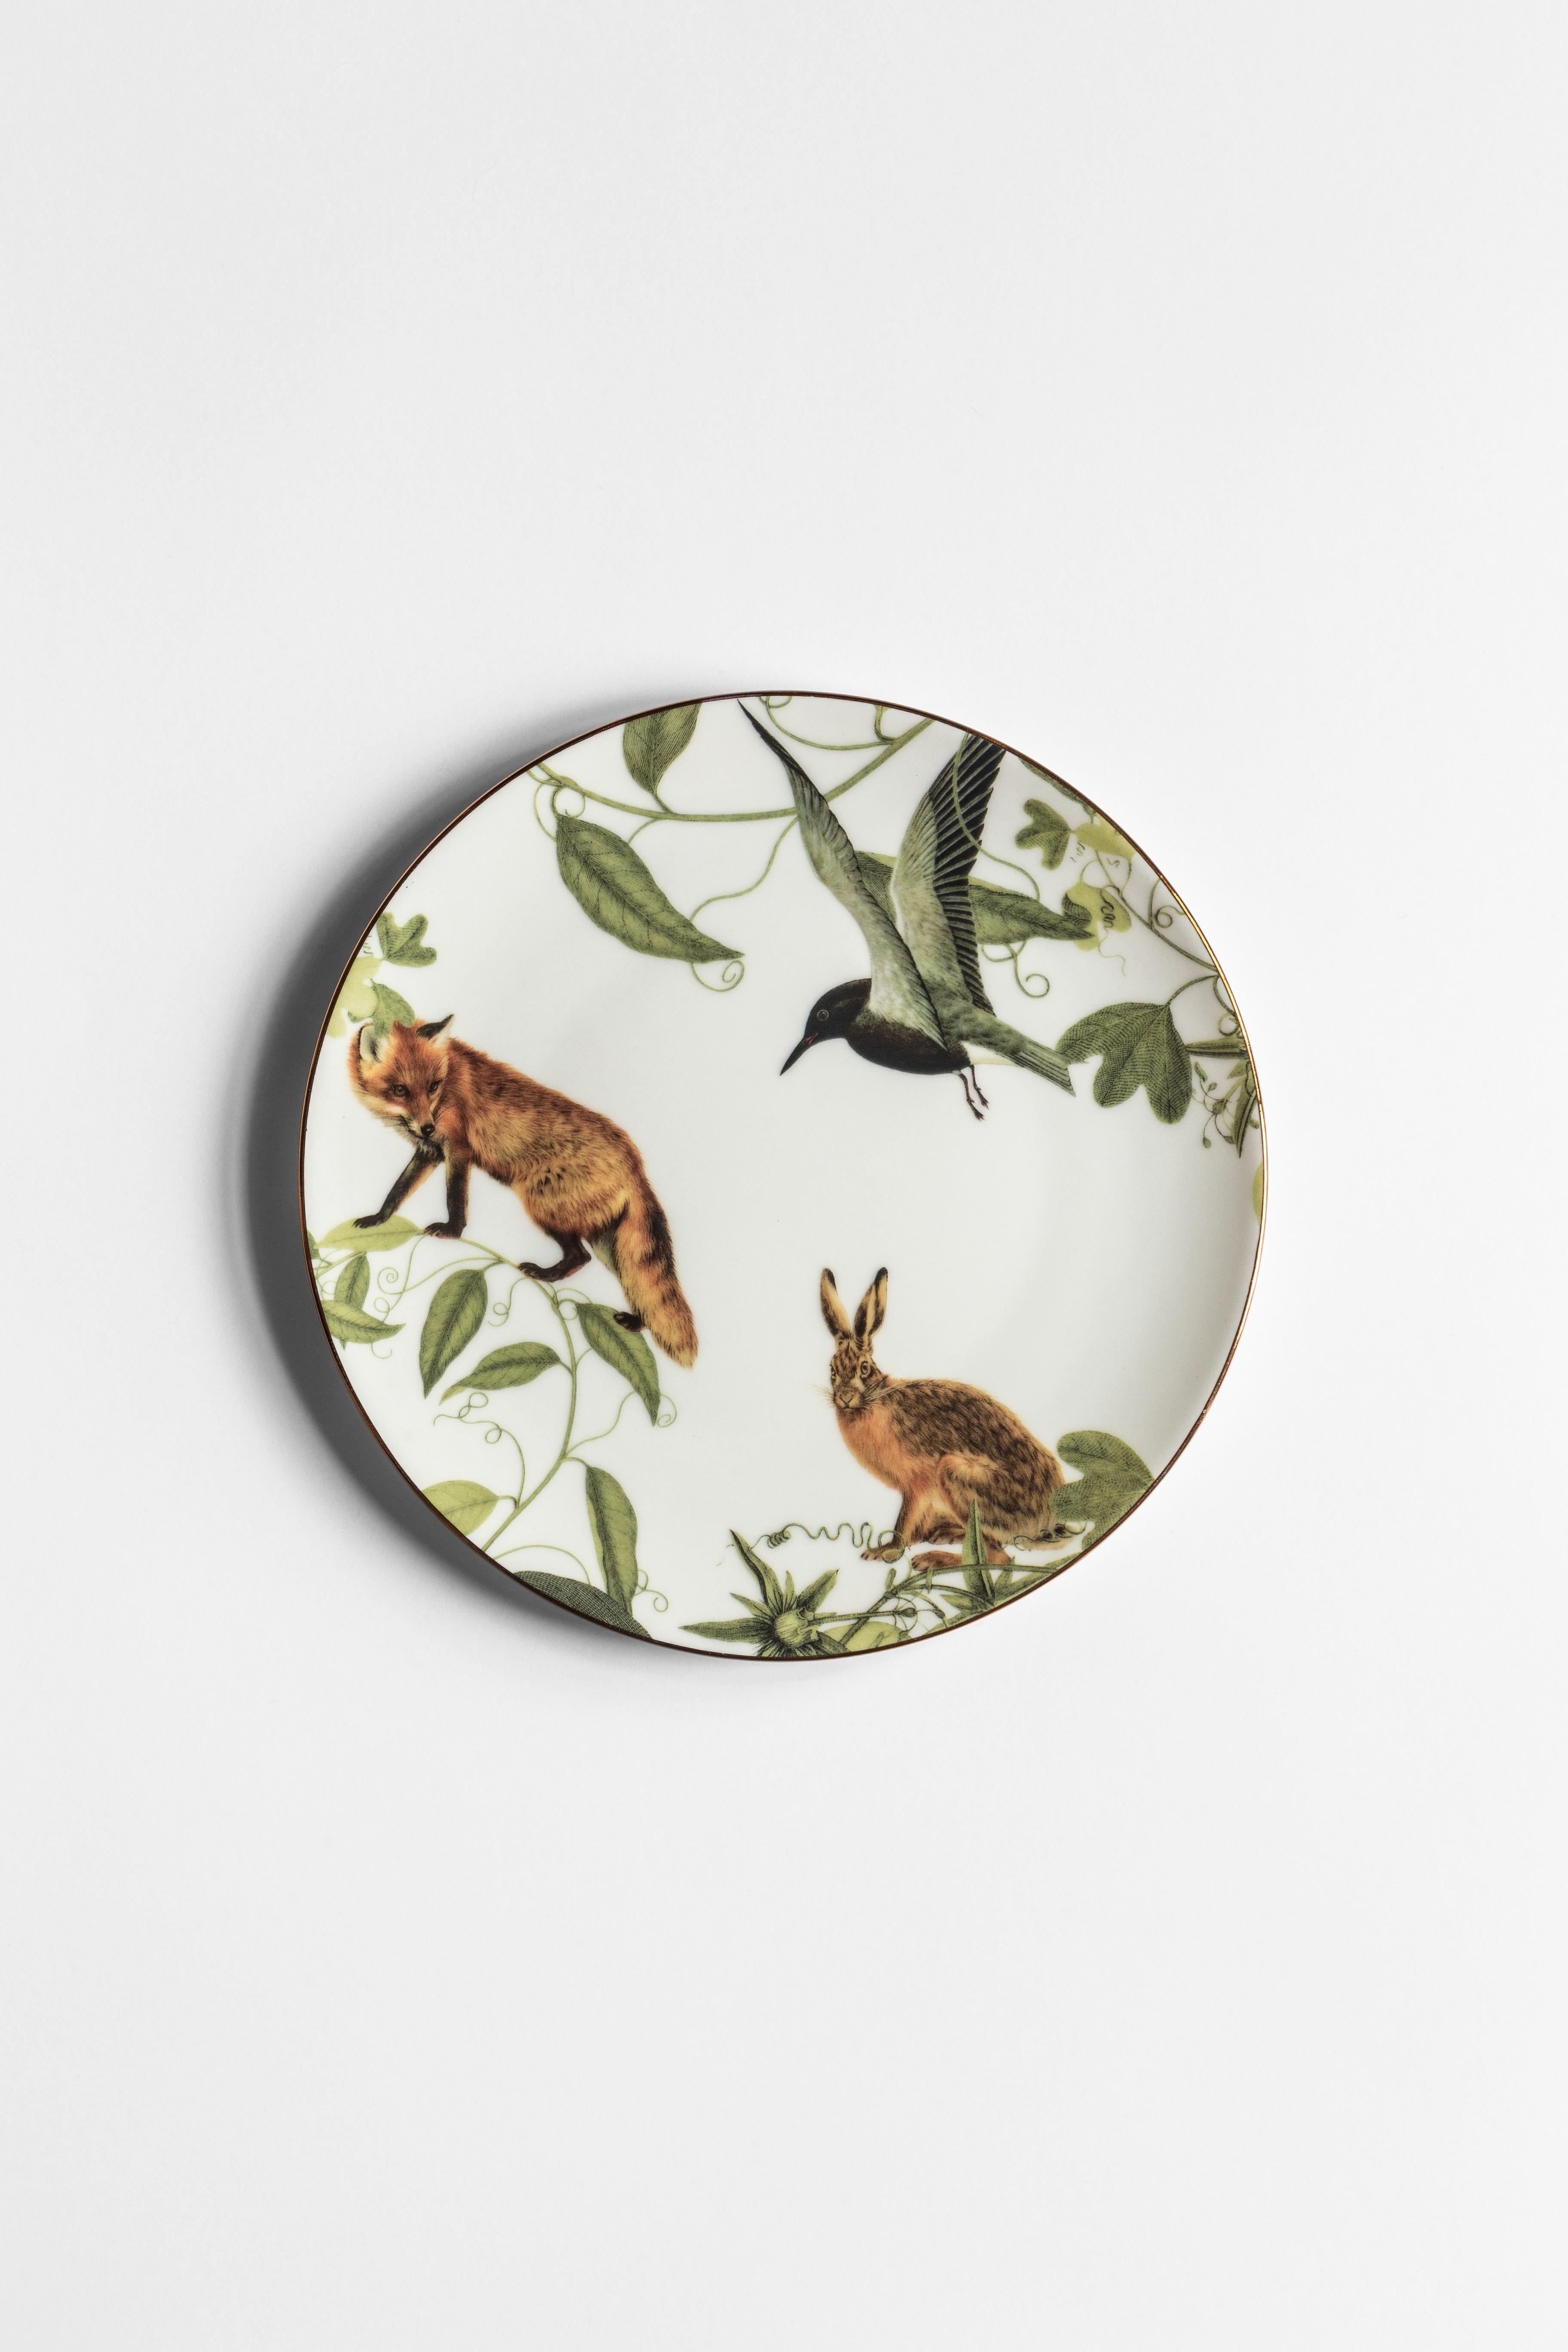 Inspired by the highest mountain of the Alps, the Mont Blanc, this collection of plates is a photography of the changing seasons. Winter is here and all the animals of the woods are enjoying the glazing air, playing hide and seek among the leaves.